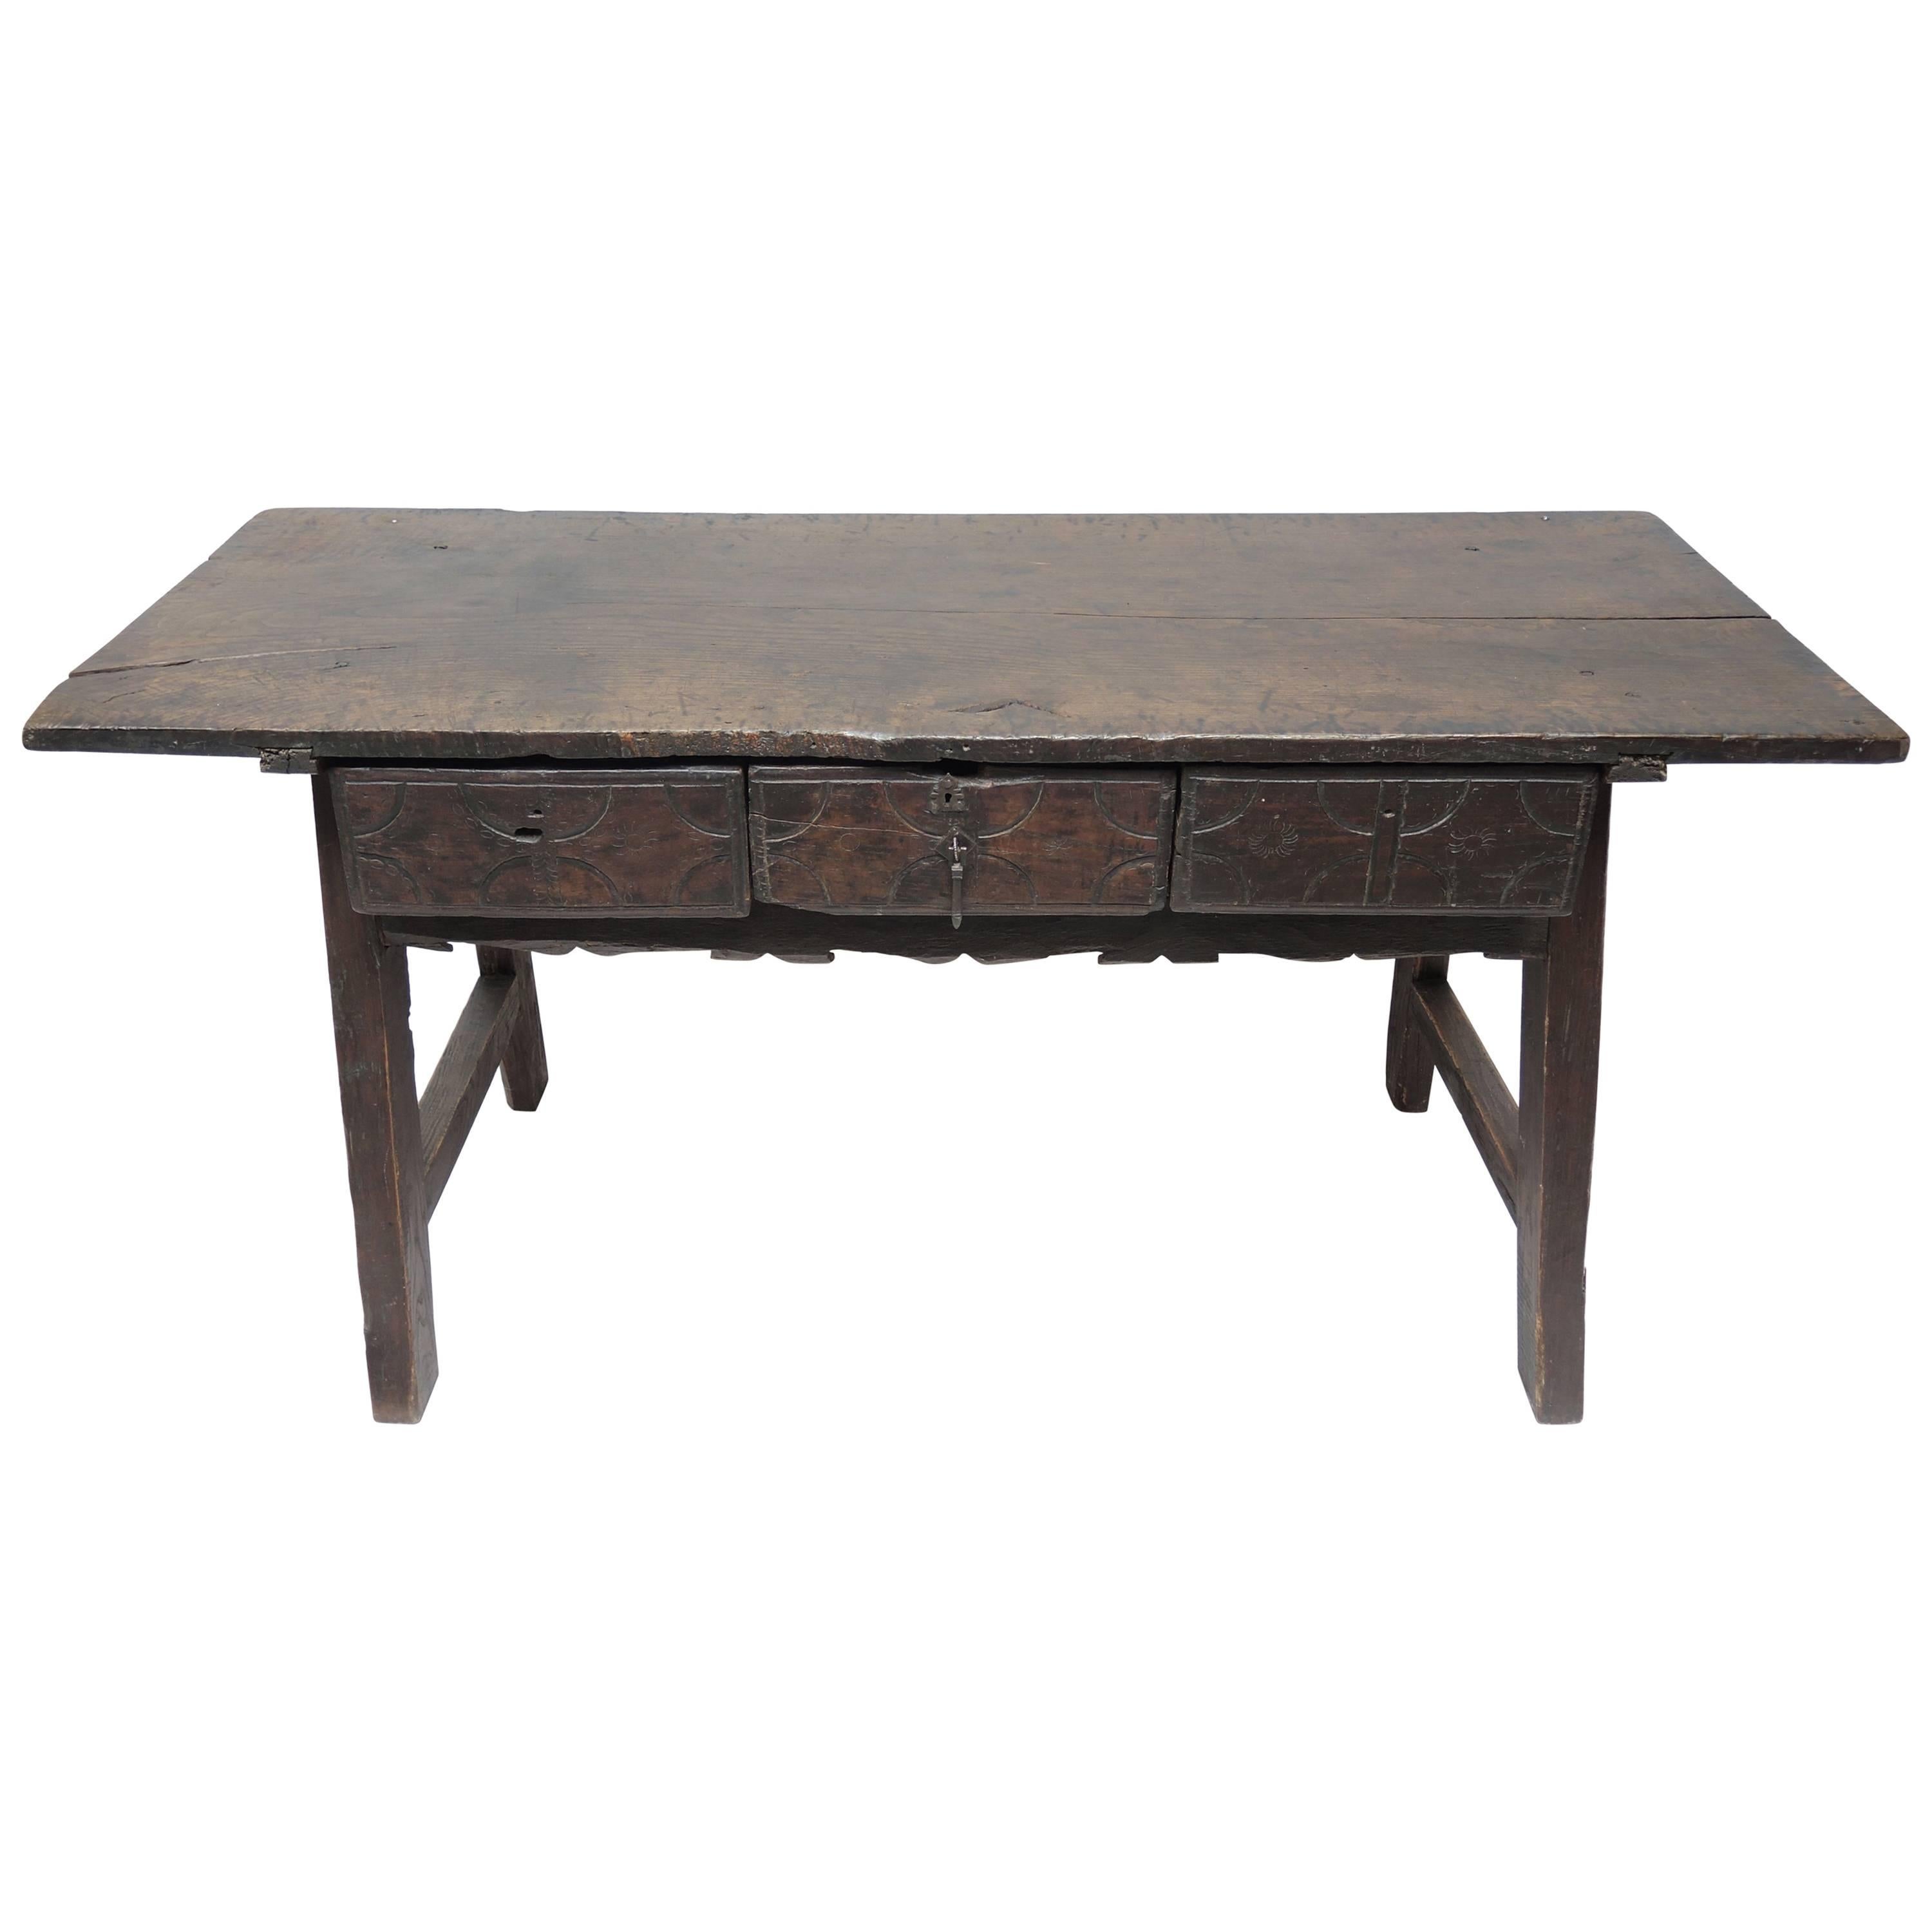 Period 17th Century Spanish Baroque Chestnut Trestle Table For Sale